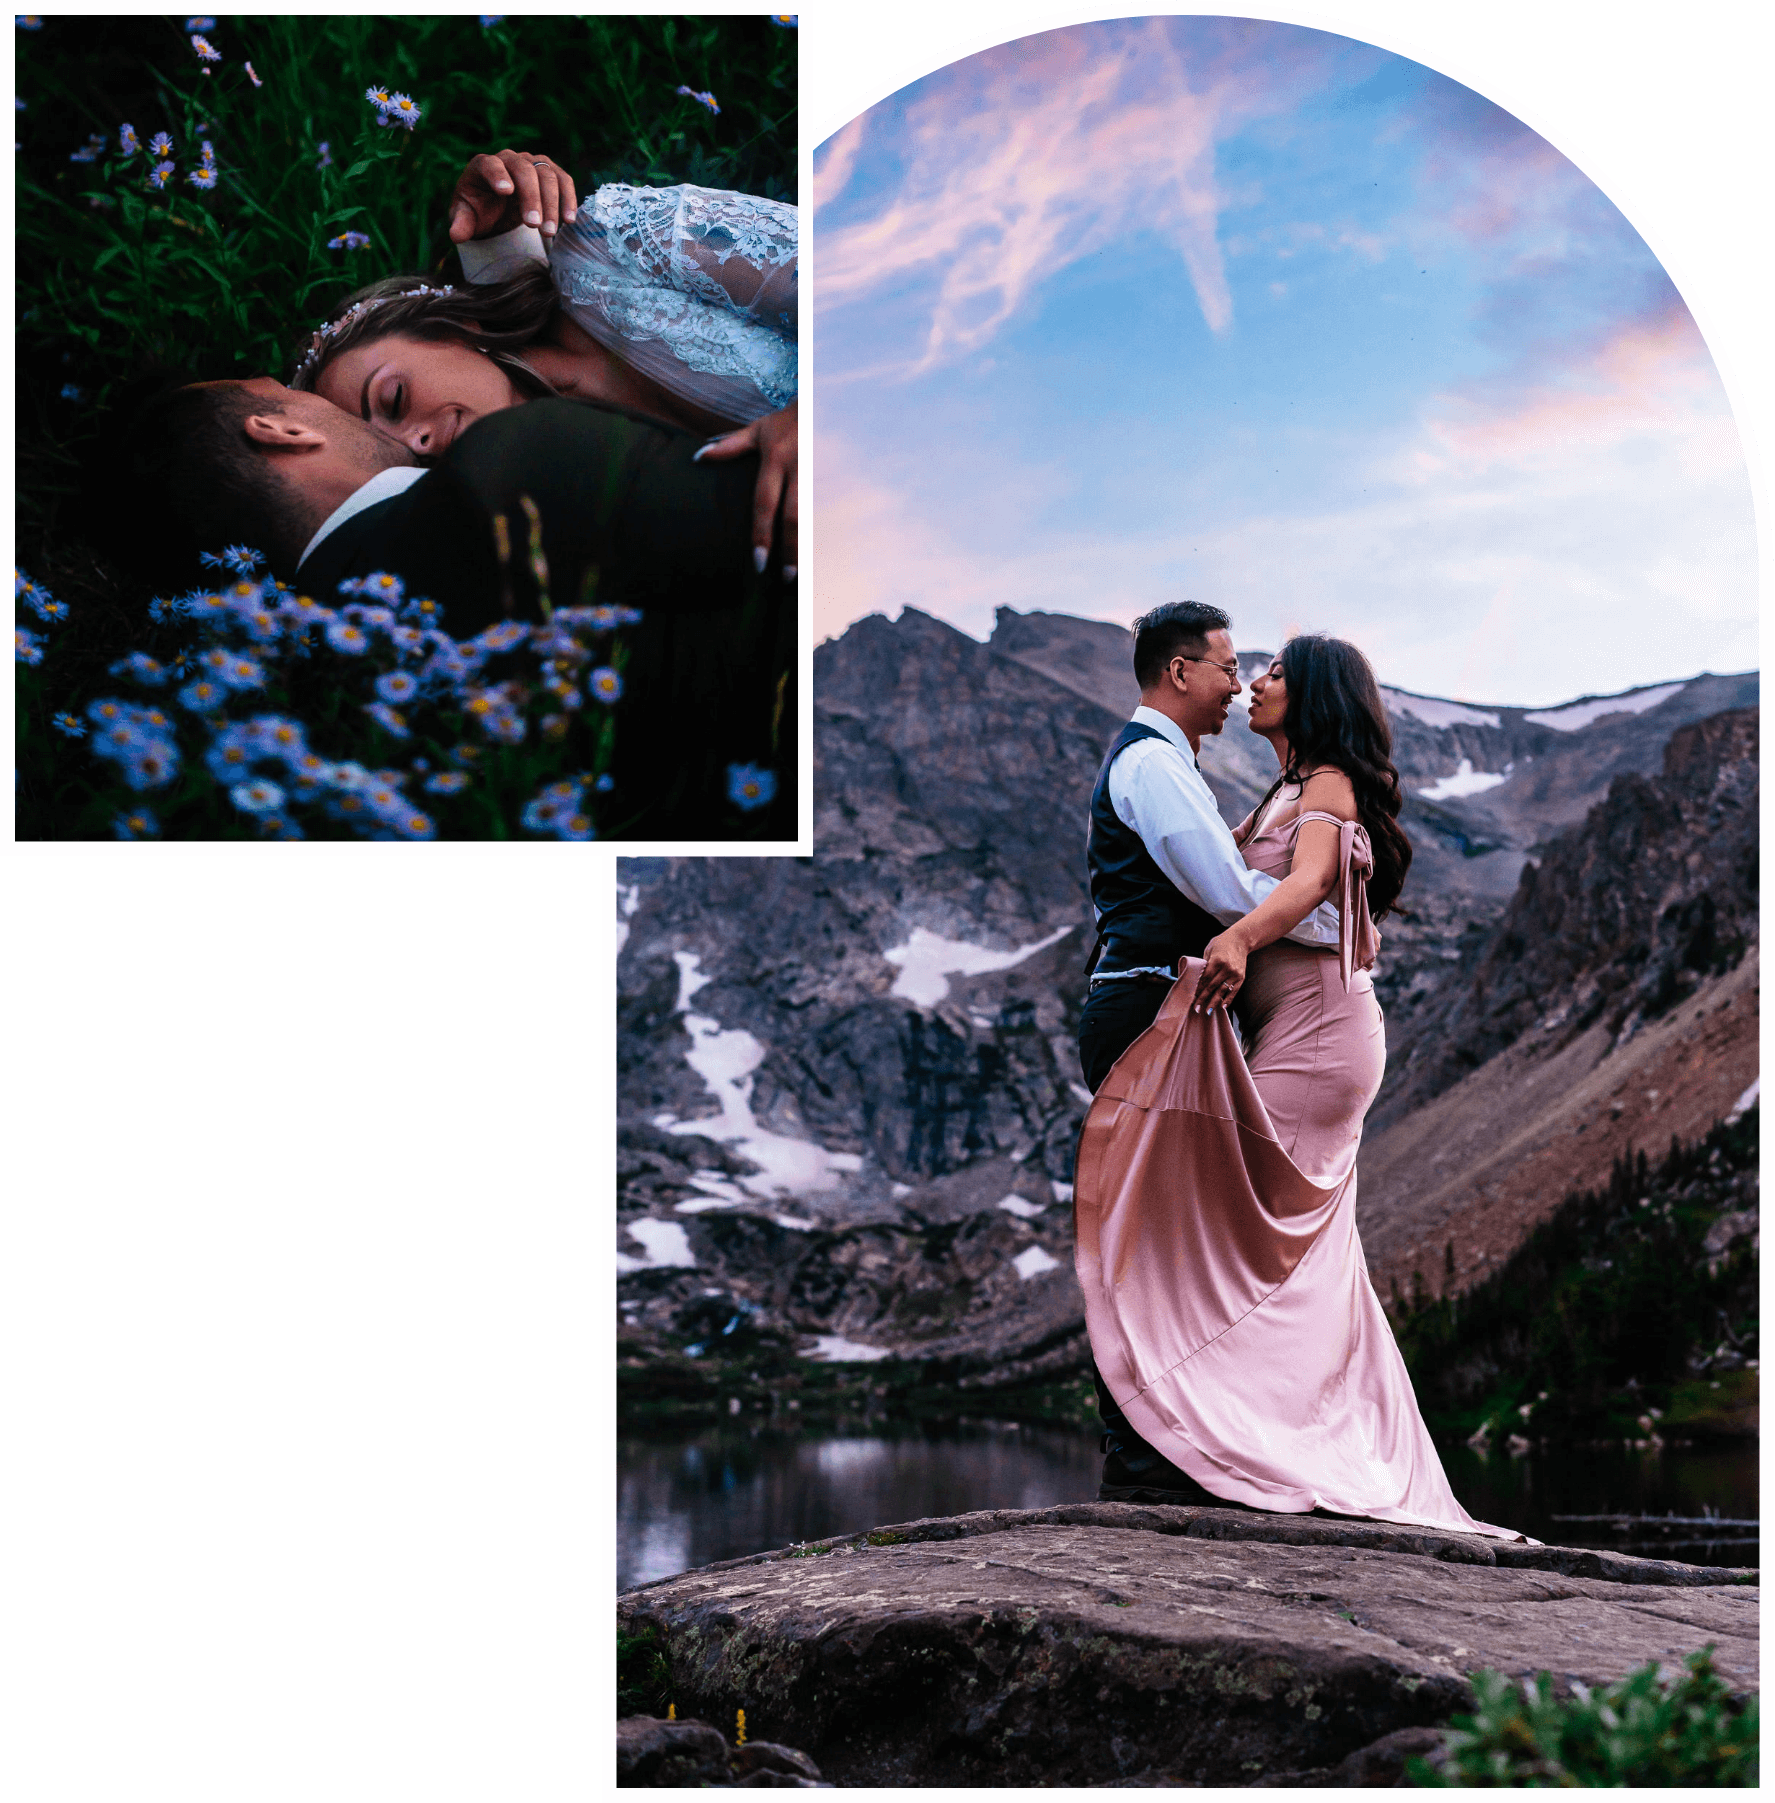 A couple embracing in nature, with one image showing them lying in a flower field and the other standing together on a rock by a mountain lake, captured by a Colorado elopement photographer.